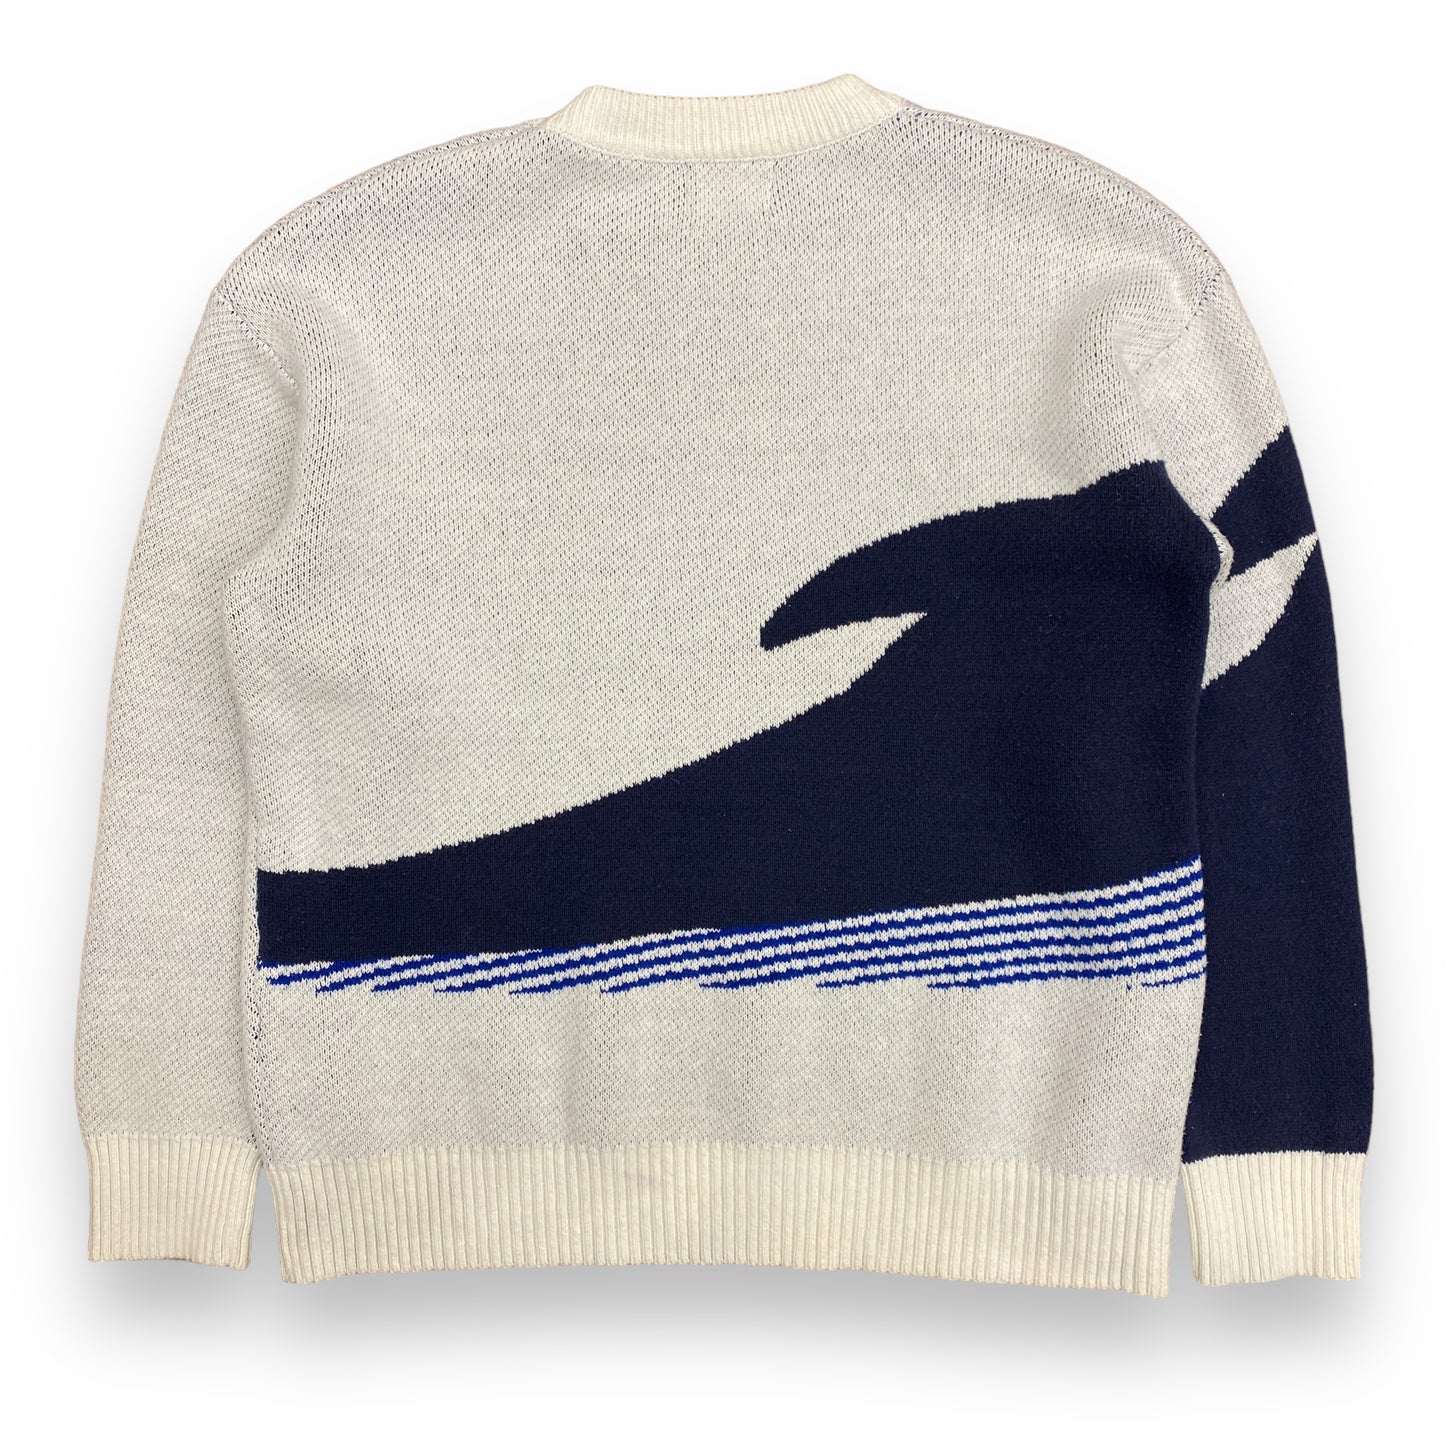 Aelfric Eden "Lonely Whale" Knit Sweater - Size Small (Fits M/L)